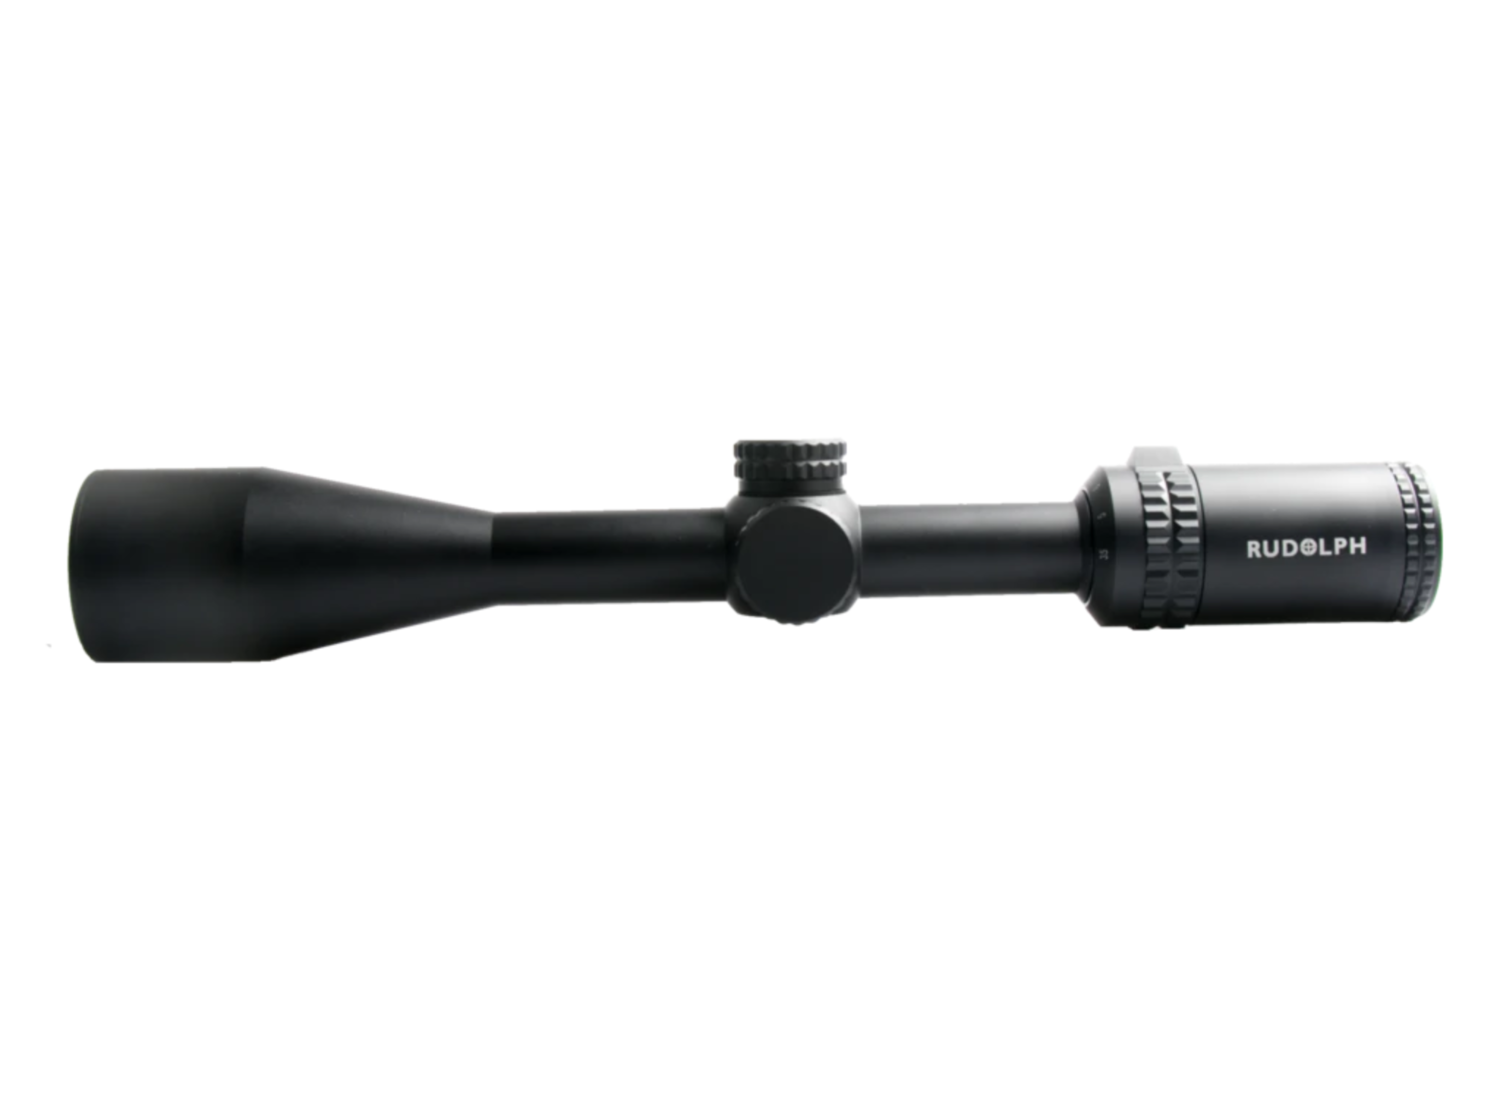 Rudolph H1 3.5-14x44mm T3 reticle (25mm)